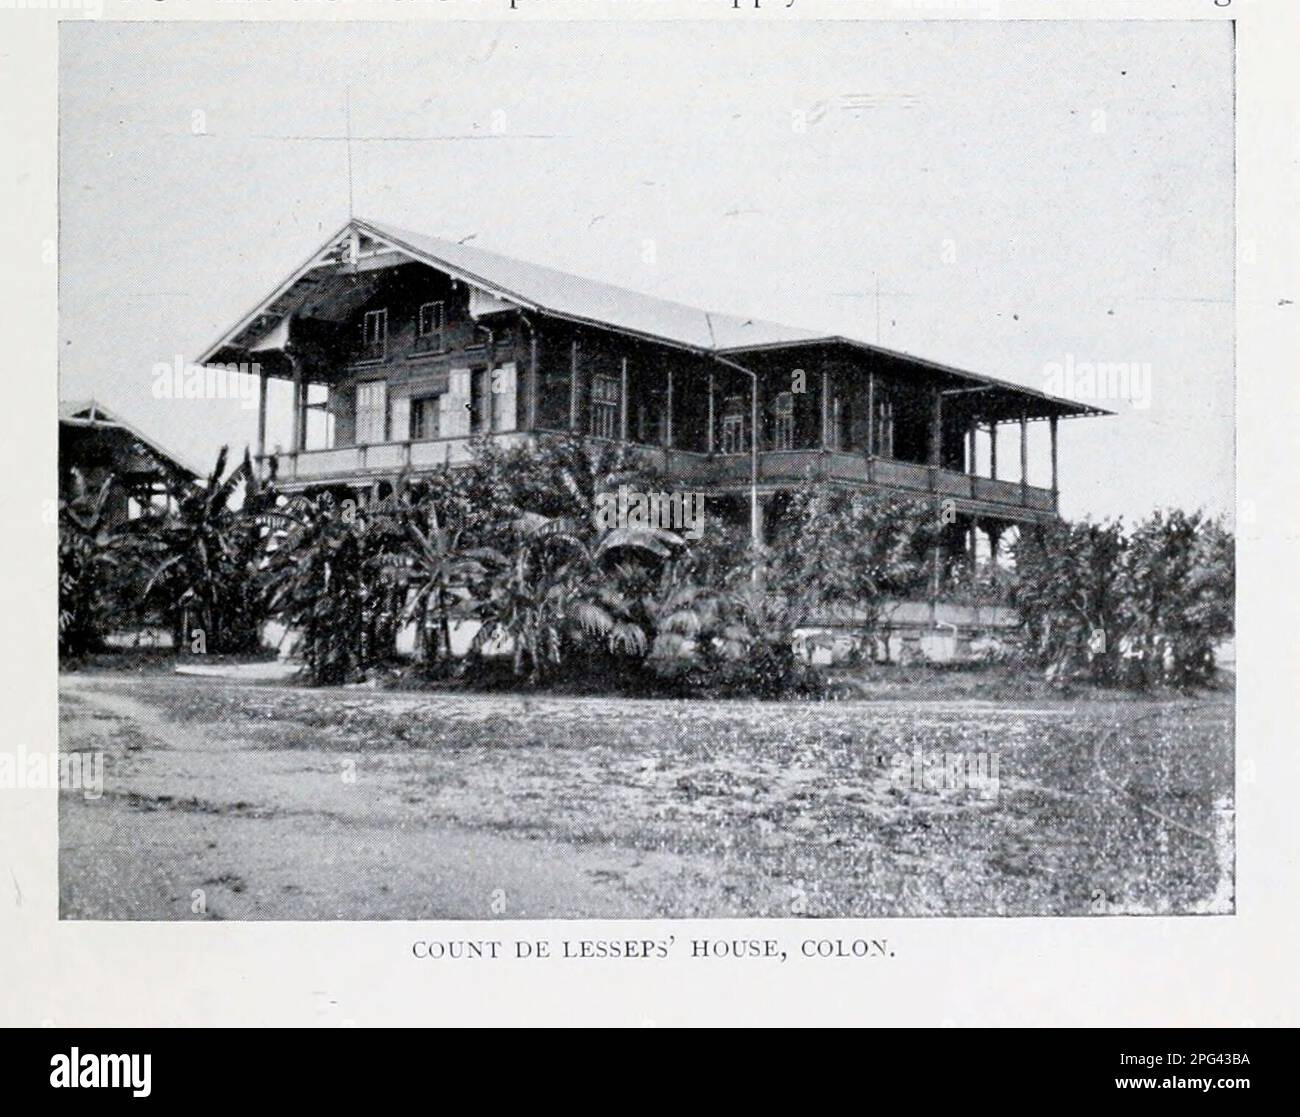 Count De Lesseps' House, Colon from the Article BUSINESS OPPORTUNITIES IN COLOMBIA. By C. F. Z. Caracristi. from The Engineering Magazine DEVOTED TO INDUSTRIAL PROGRESS Volume IX April to September, 1895 NEW YORK The Engineering Magazine Co Stock Photo